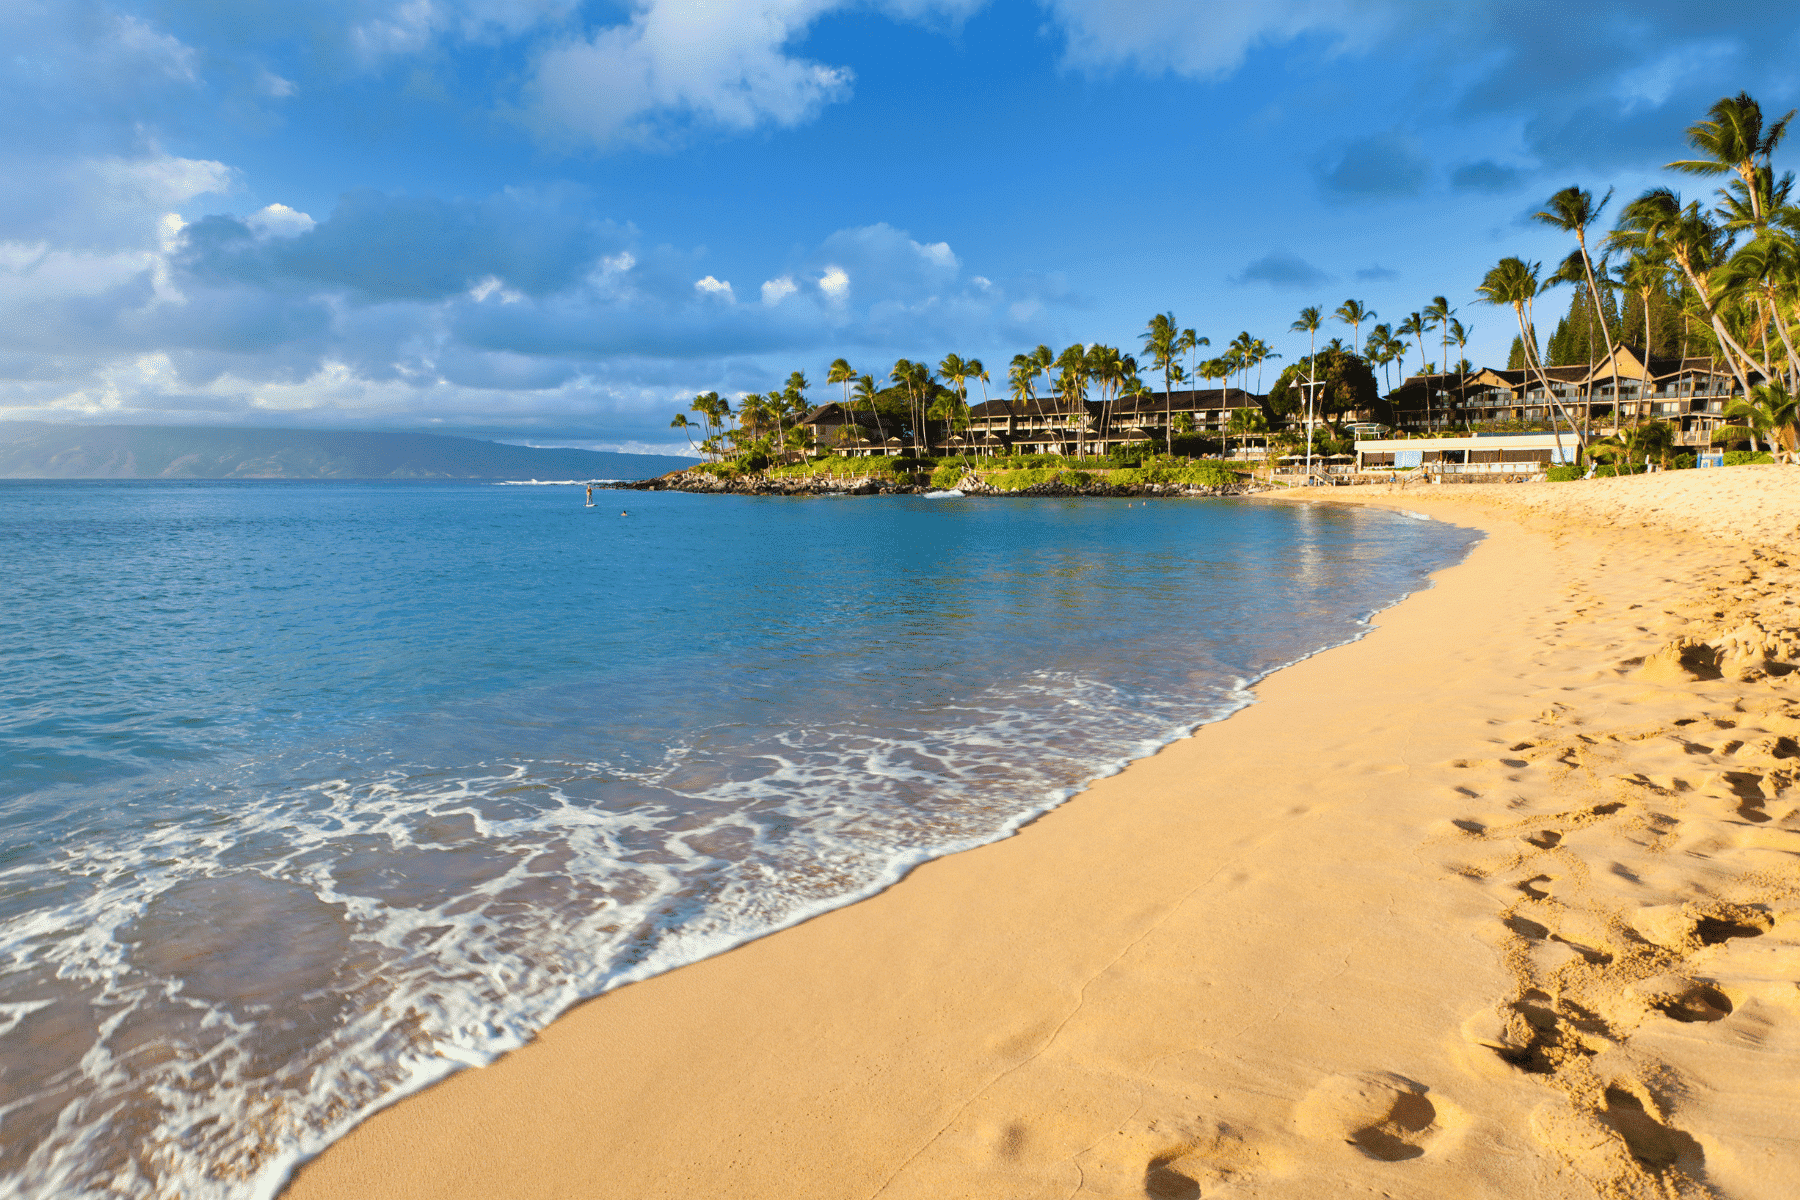 image of Napili white sand beach next to the Napili Kai Beach Resort with west maui mountains in the distance making it the perfect stay in maui